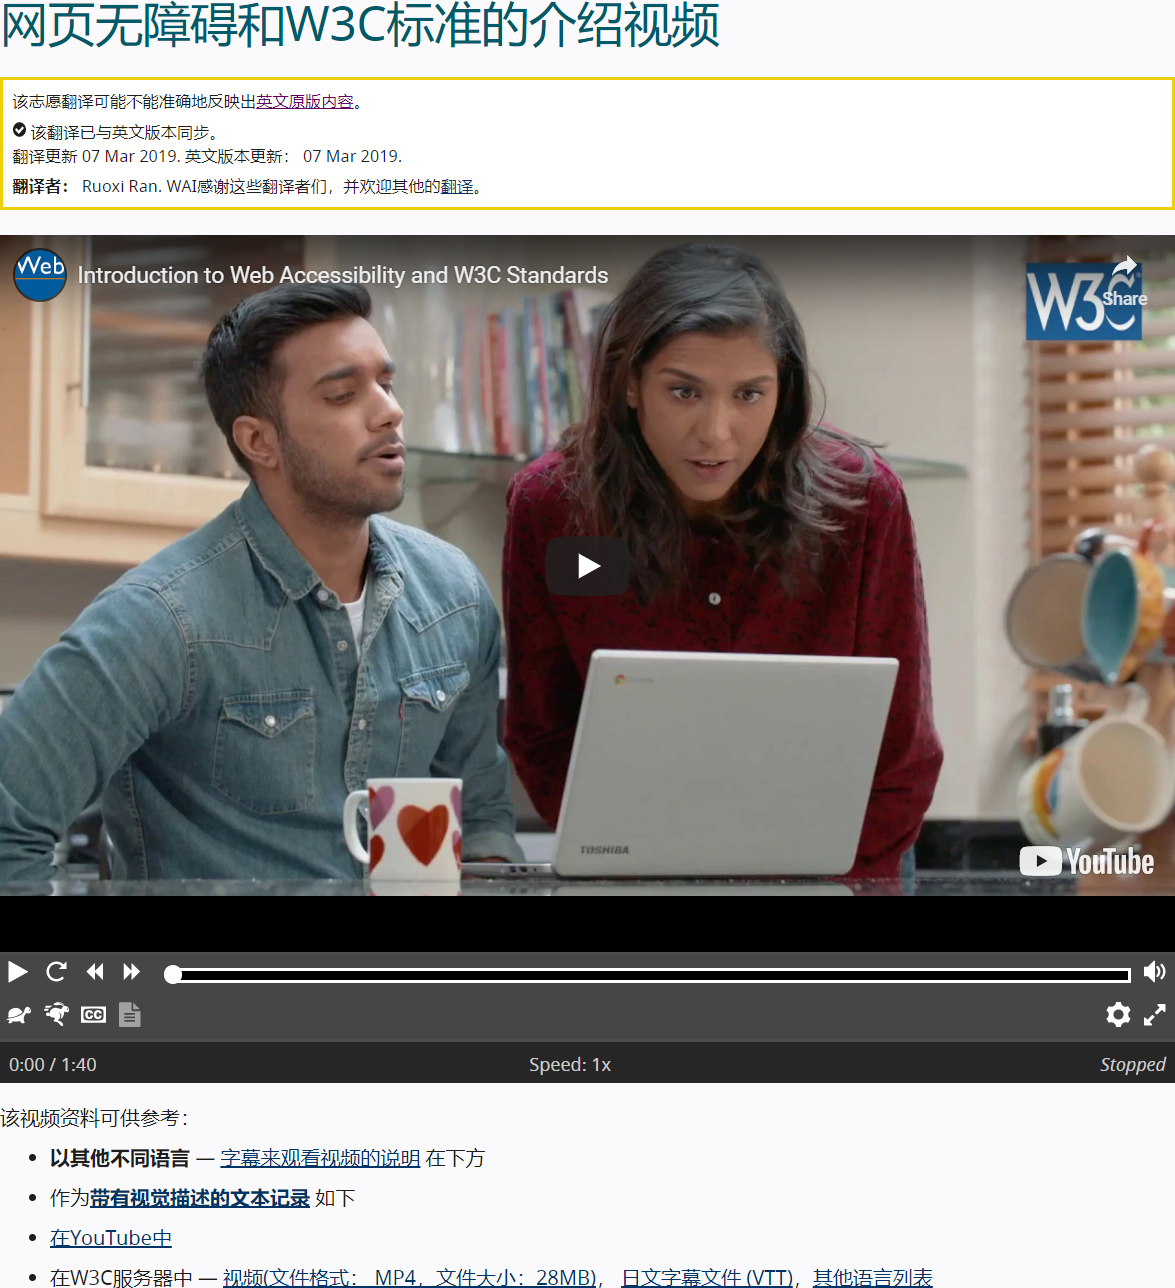 Initial screenshot on introductory video on Web accessibility showing two individuals looking at a computer screen